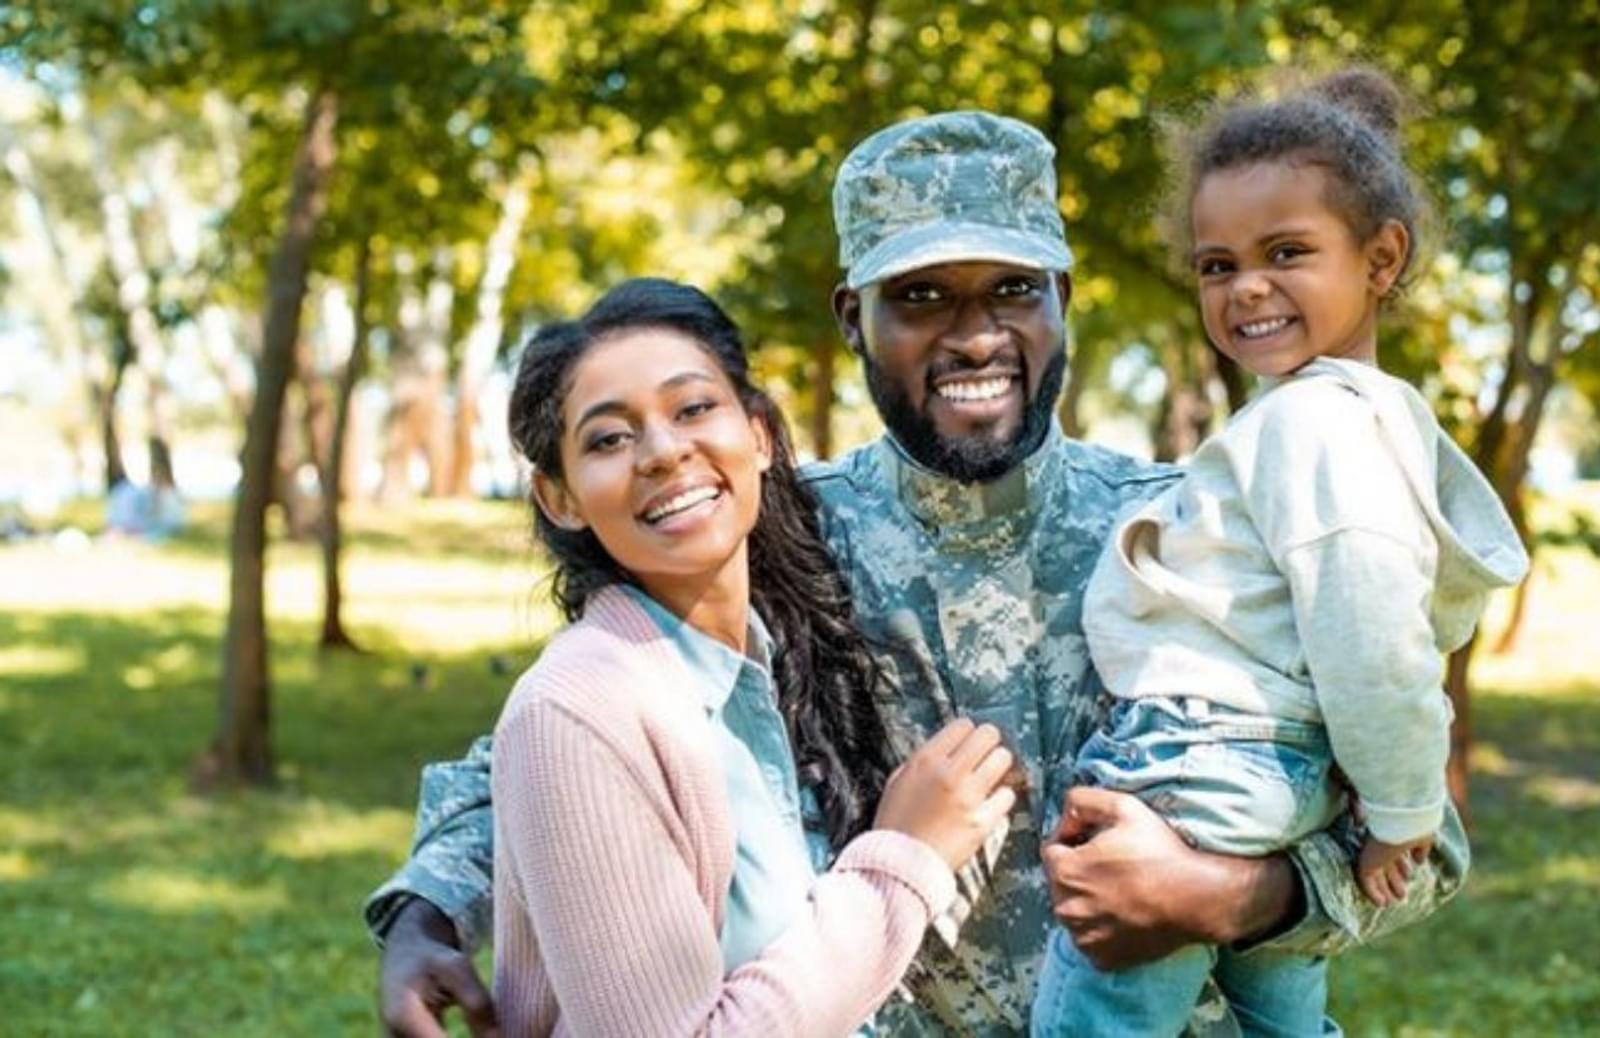 Man in miltary fatigues holding child with arm around spouse